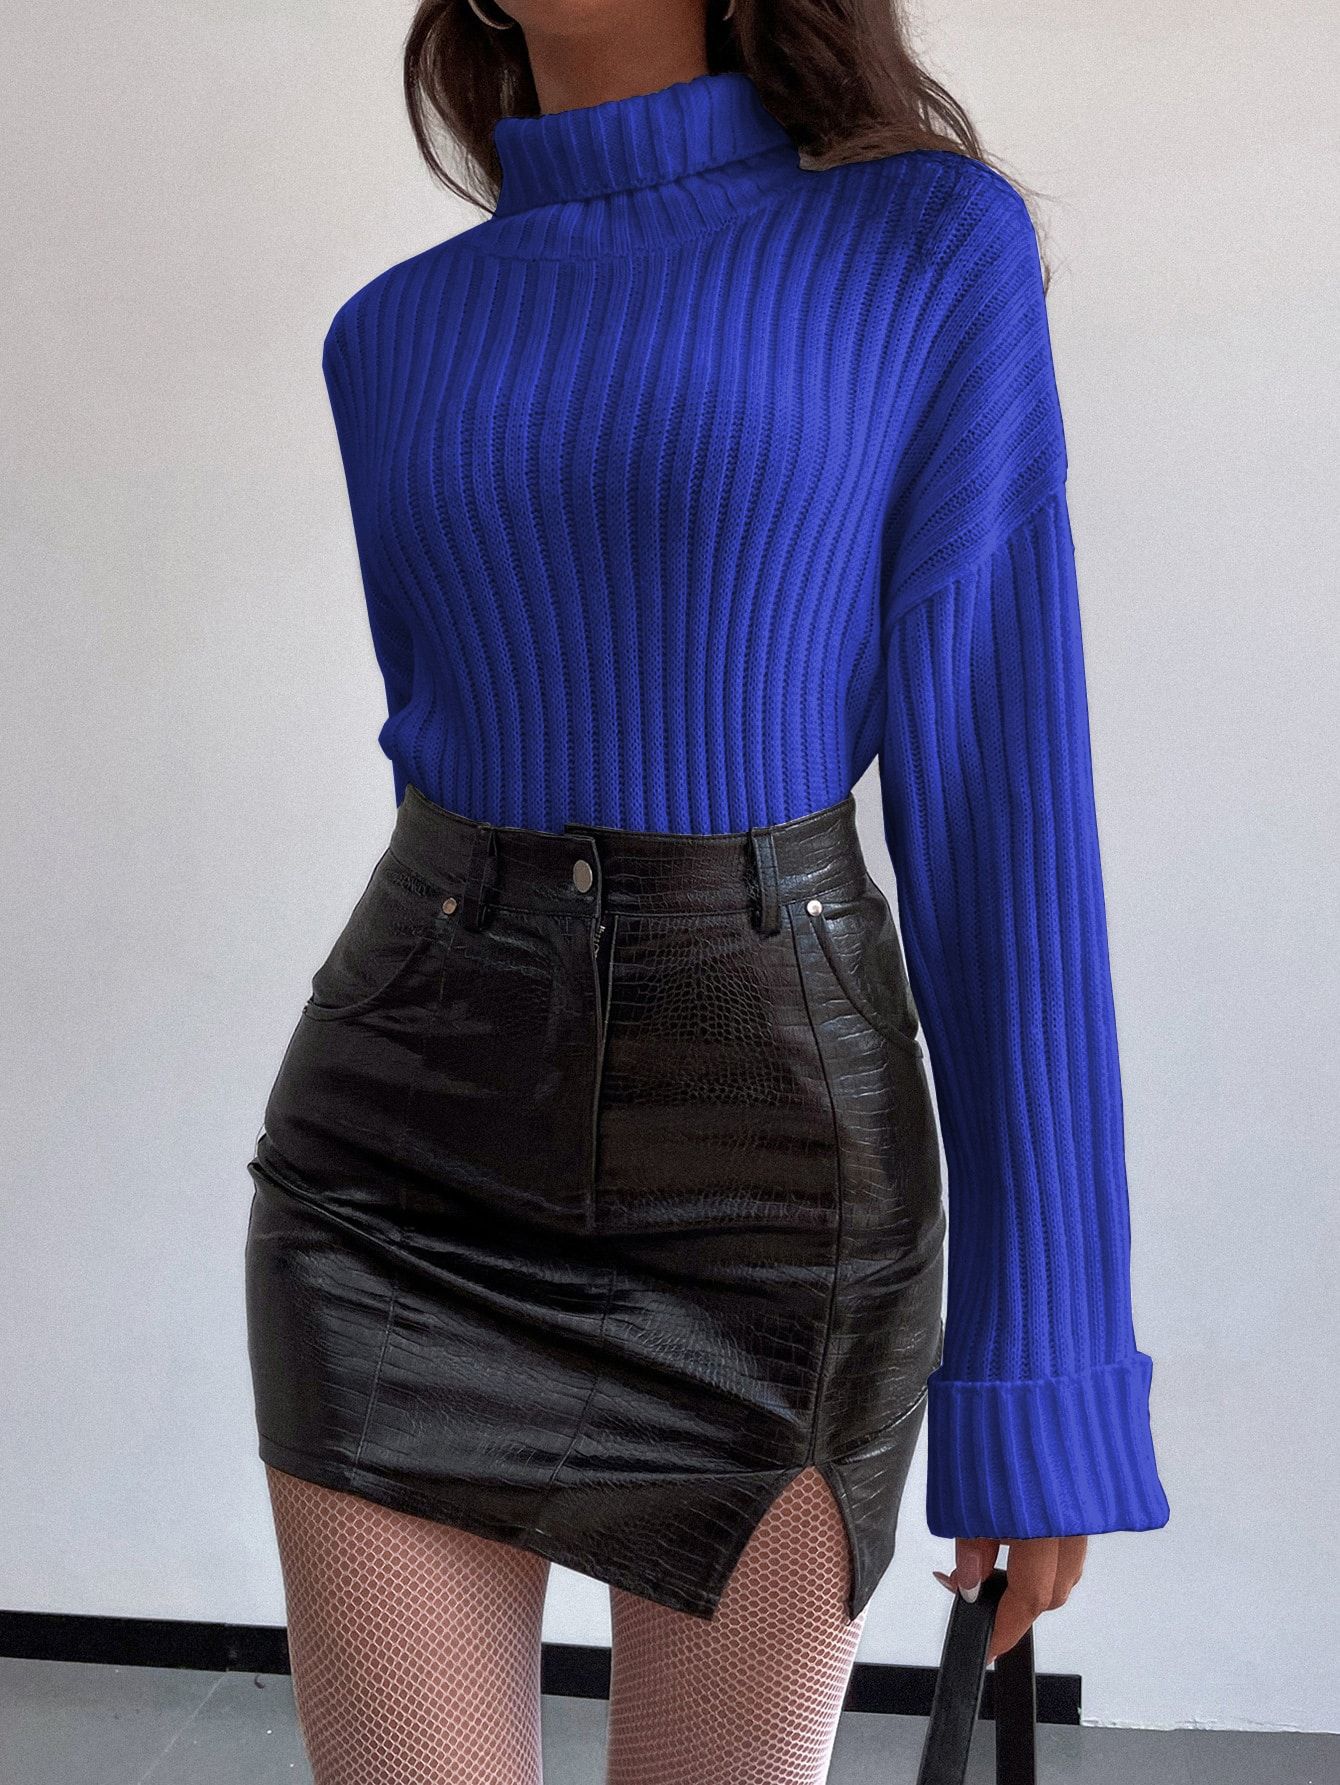 How to Wear Royal Blue Sweater: 15 Attractive Outfit Ideas for Ladies